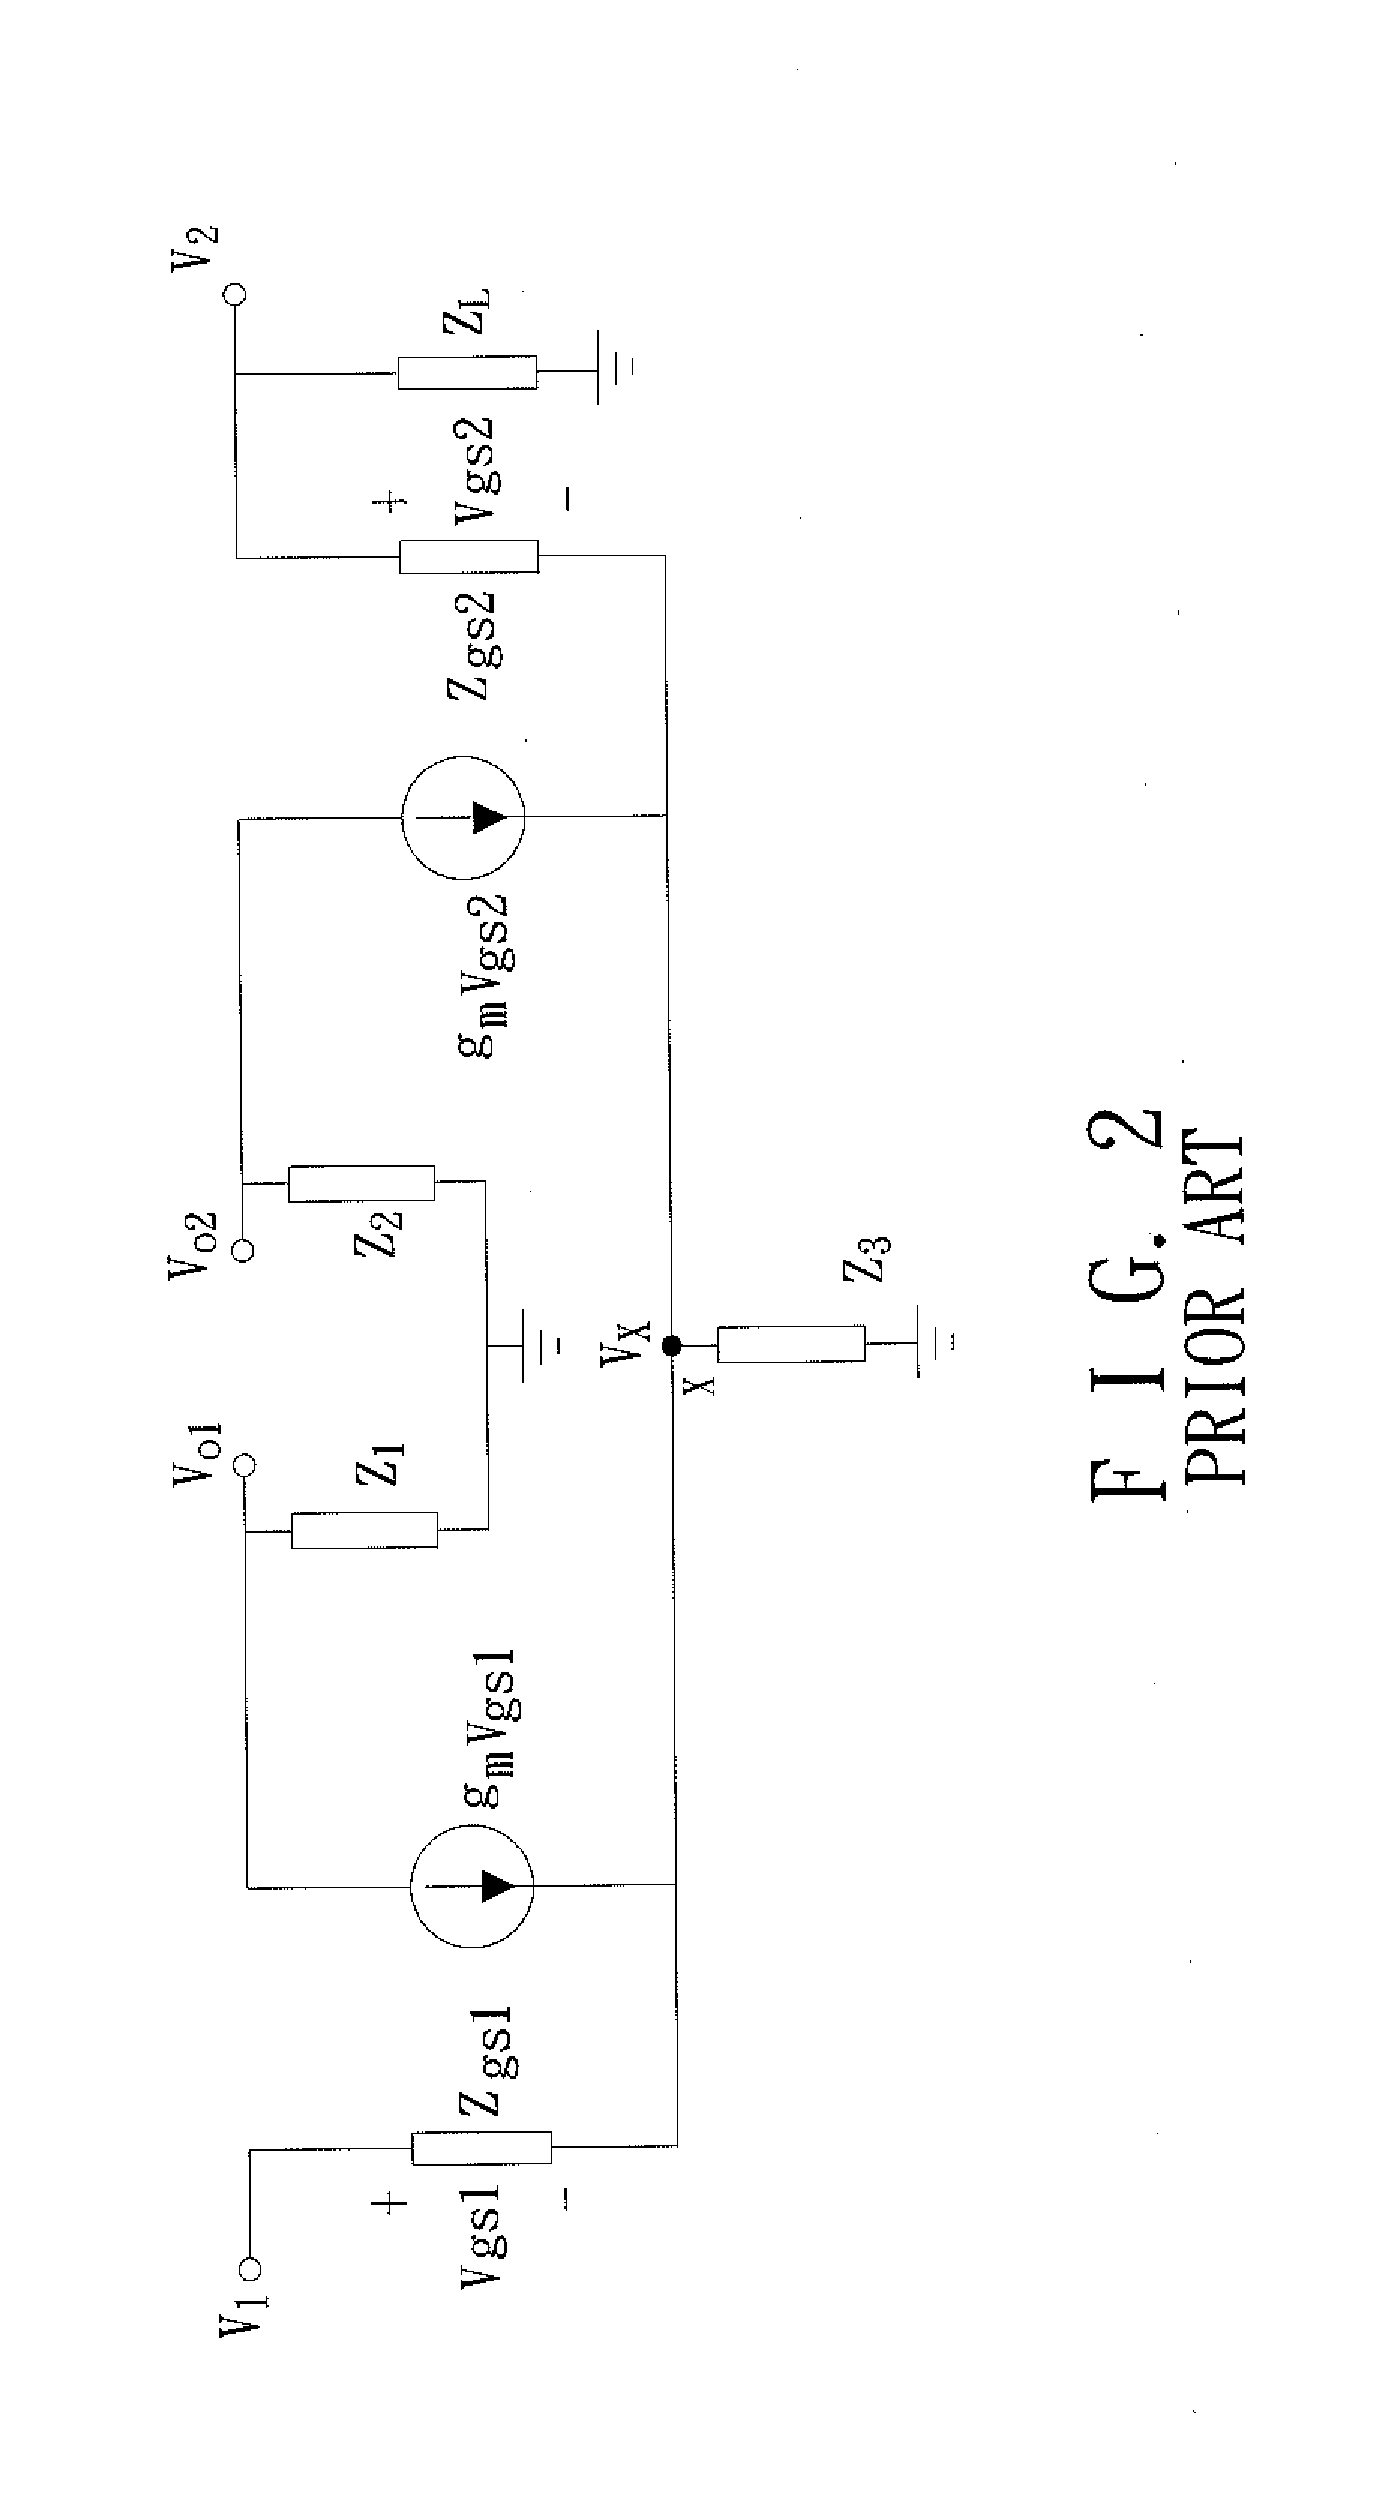 Single-to-differential conversion circuit